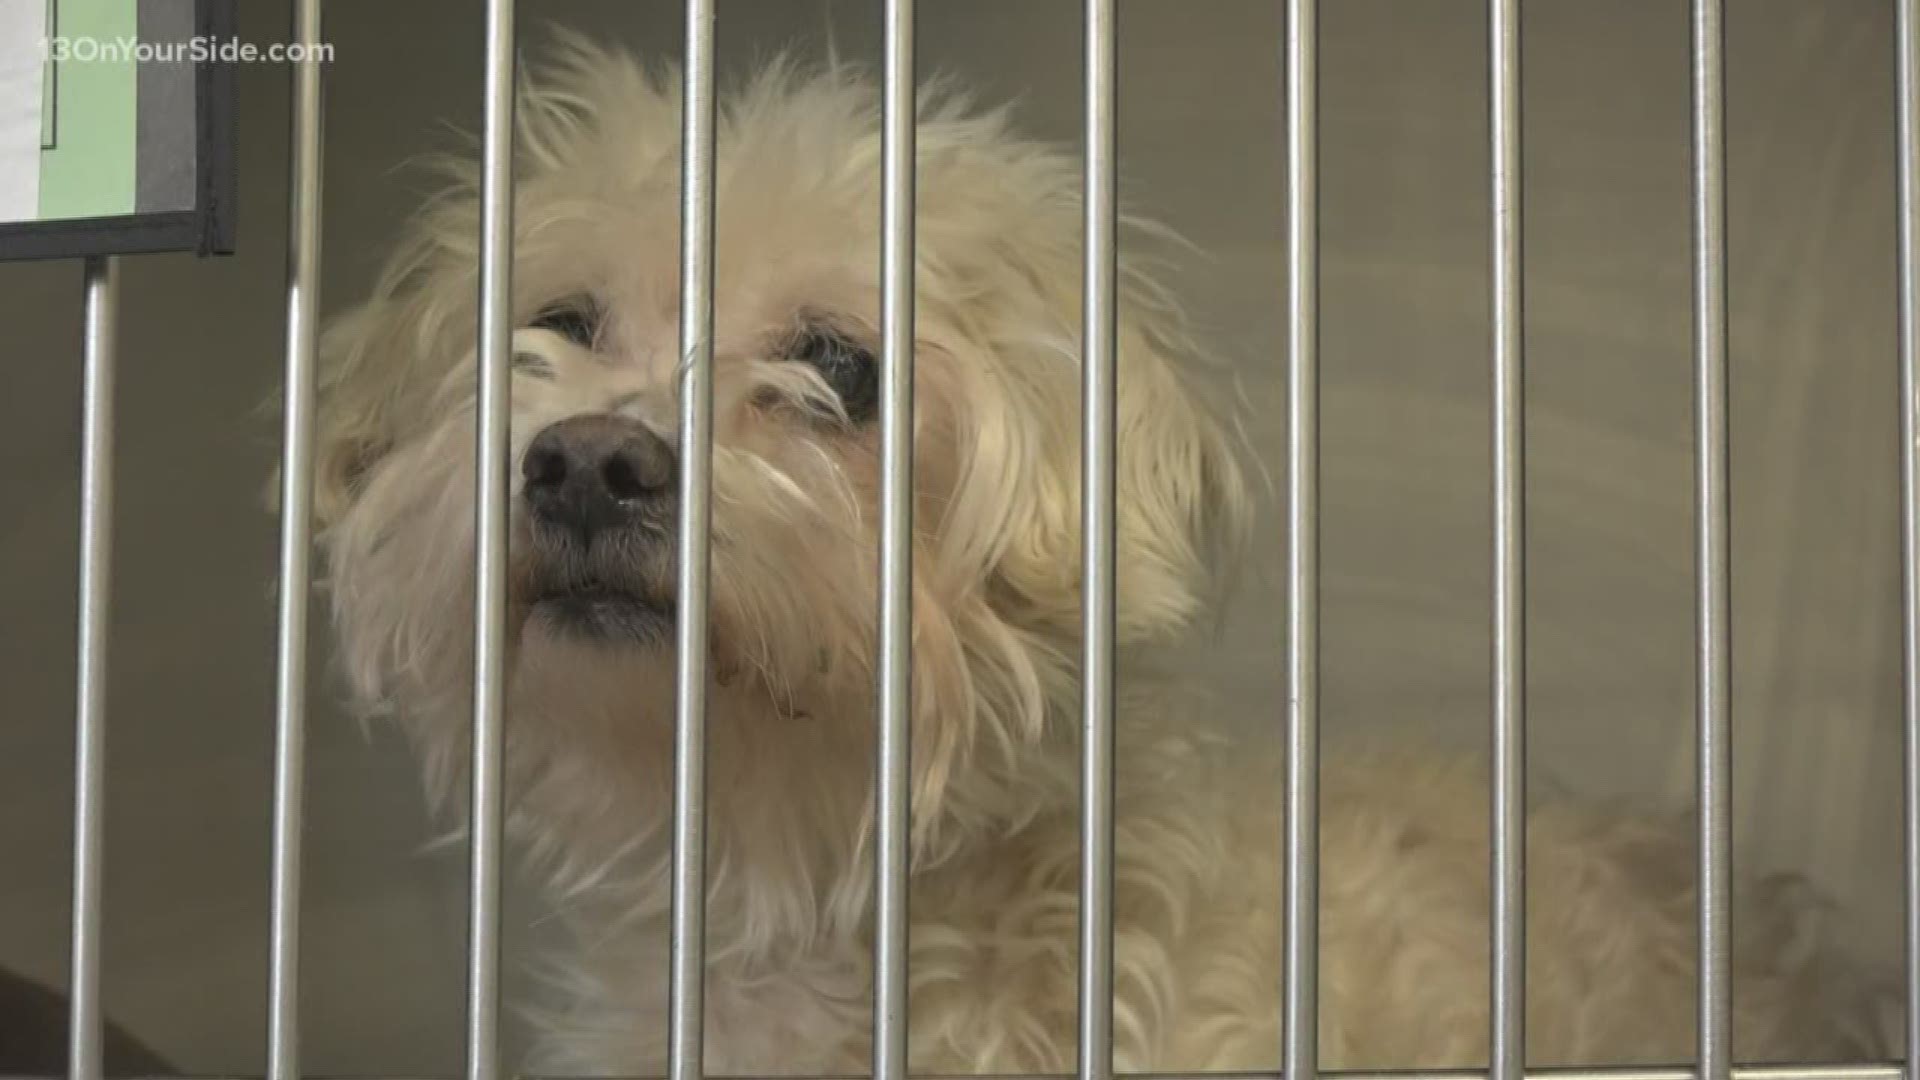 Lawmakers in Lansing are proposing legislation that would protect pets from extreme temperatures.